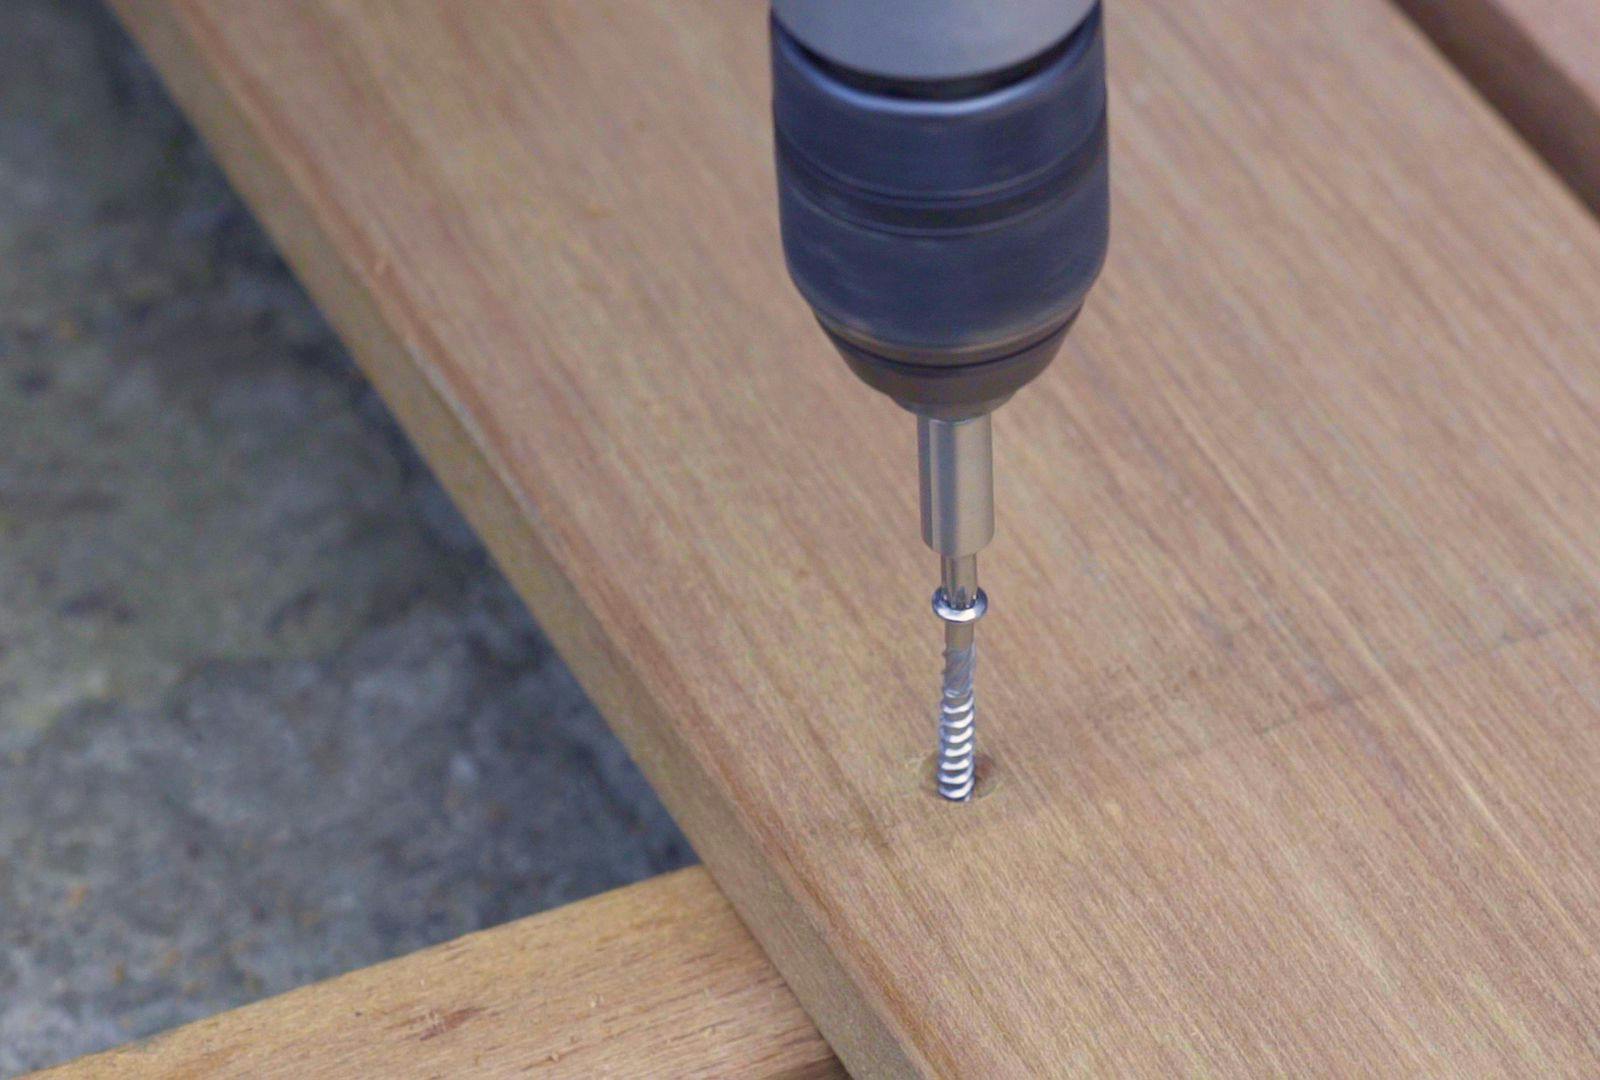 Everything you need to know when buying deck screws. Which screw is the best one for you? In this blog, we give you tips about choosing and installing deck screws.